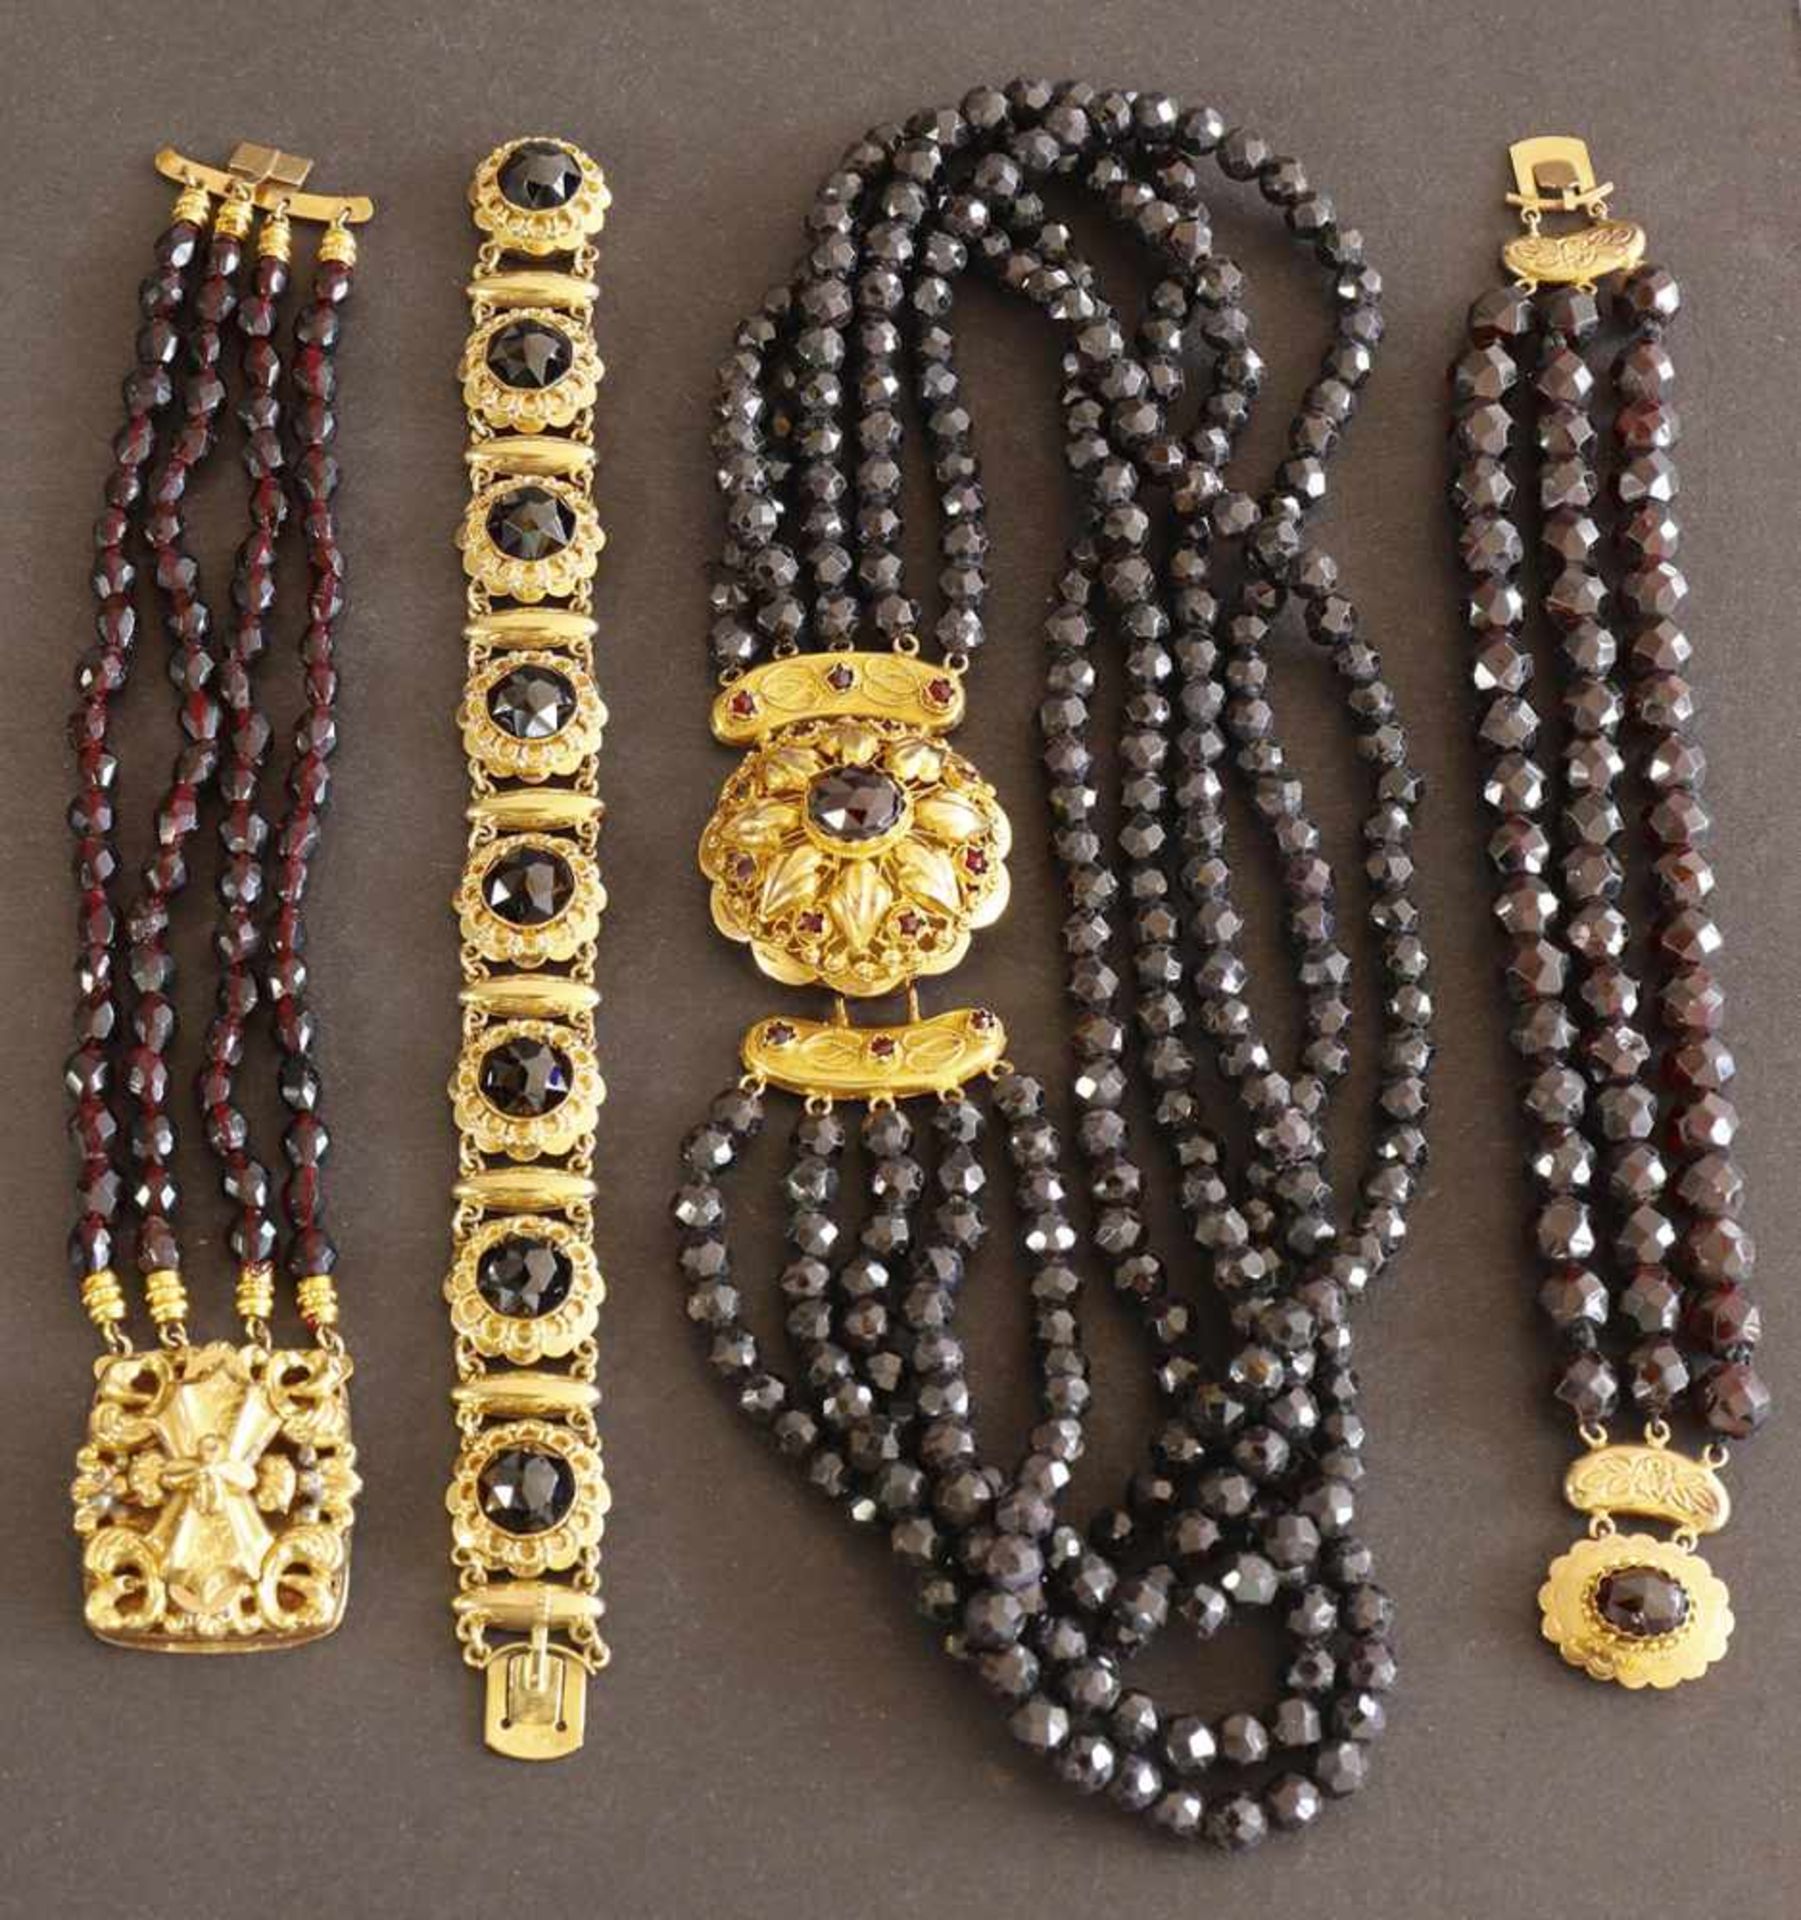 Jewellery Set, Gold 585, 4 pieces GoldJewellery set. Consisting of traditional necklace and 3